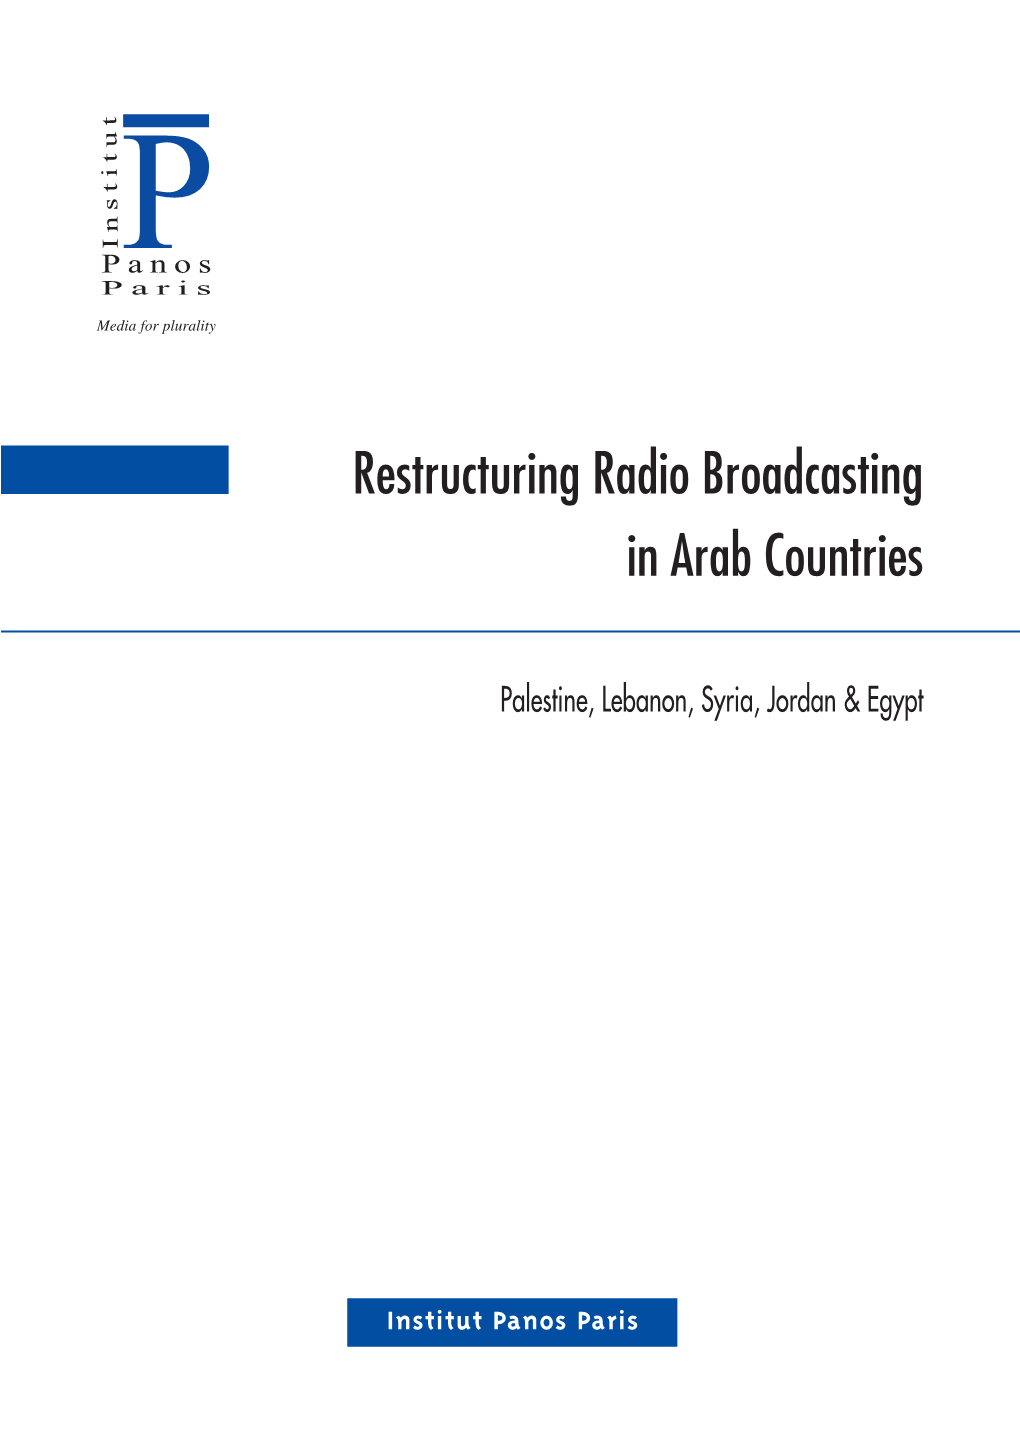 Restructuring Radio Broadcasting in Arab Countries